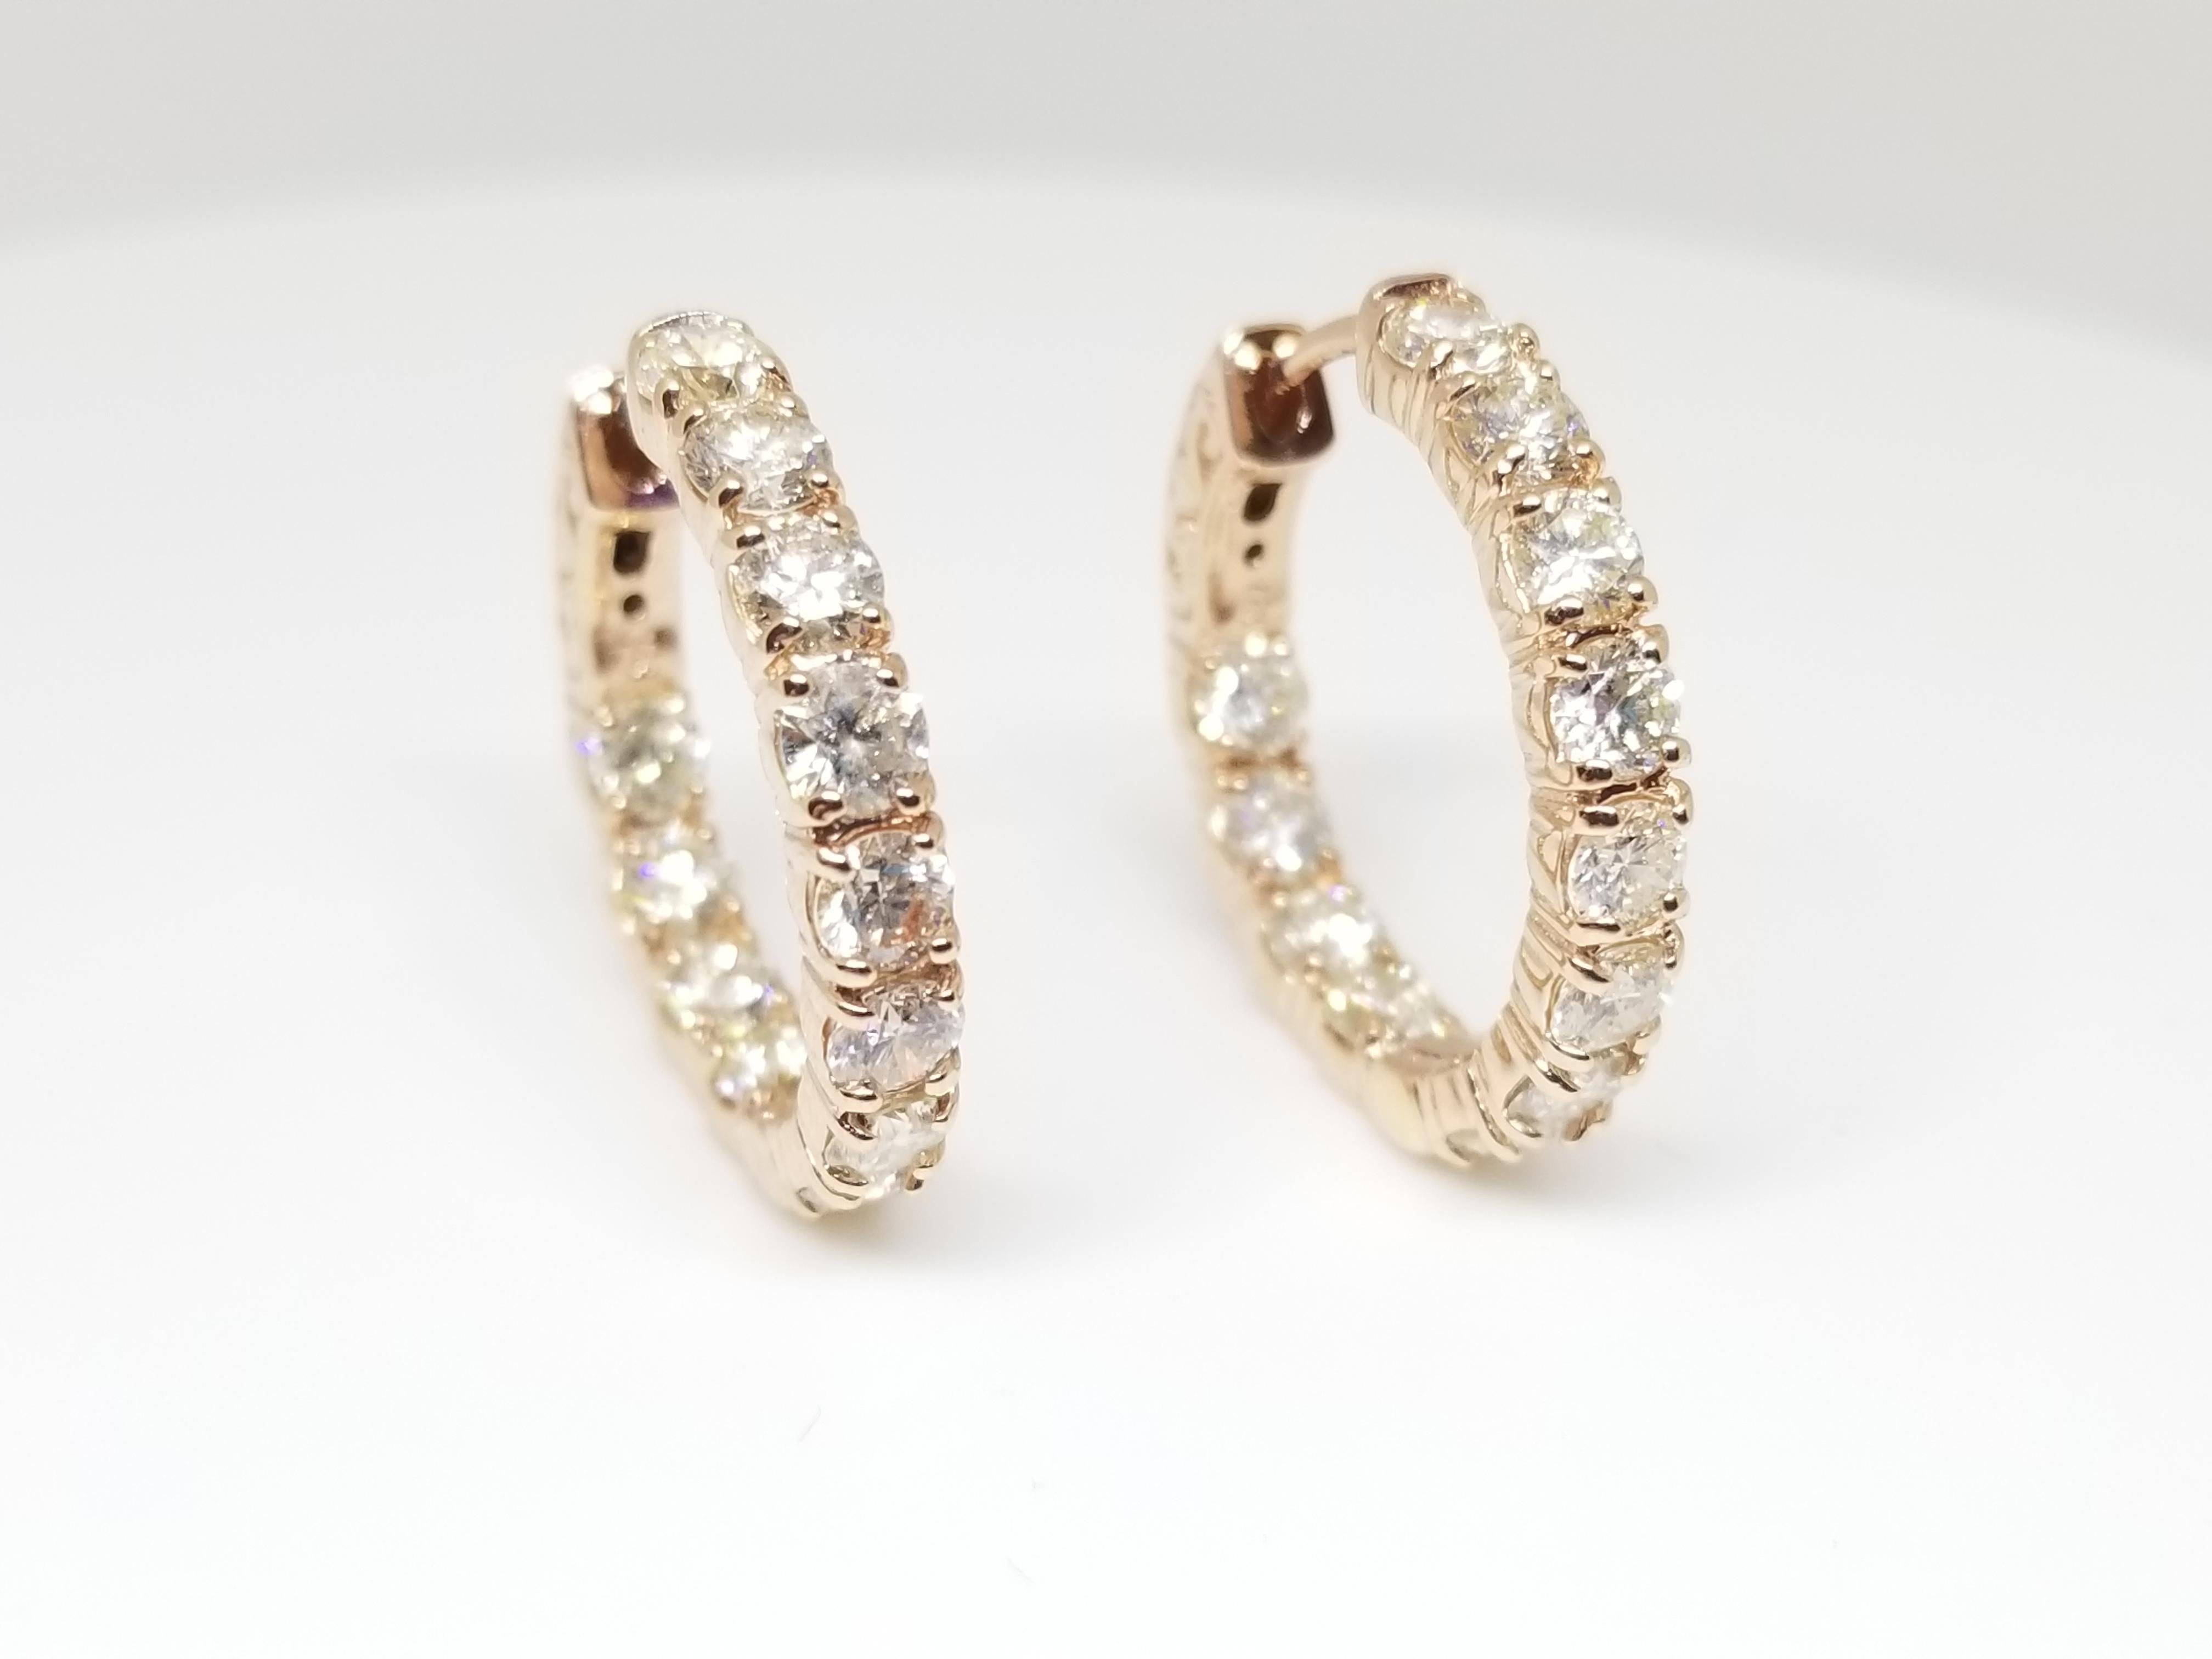 Beautiful pair of huggie diamond inside out hoop earrings available in 14k rose gold. Secures with snap closure for wear.  Measures 3/4 inch or 2mm in diameter. Beautiful stock for the holiday!